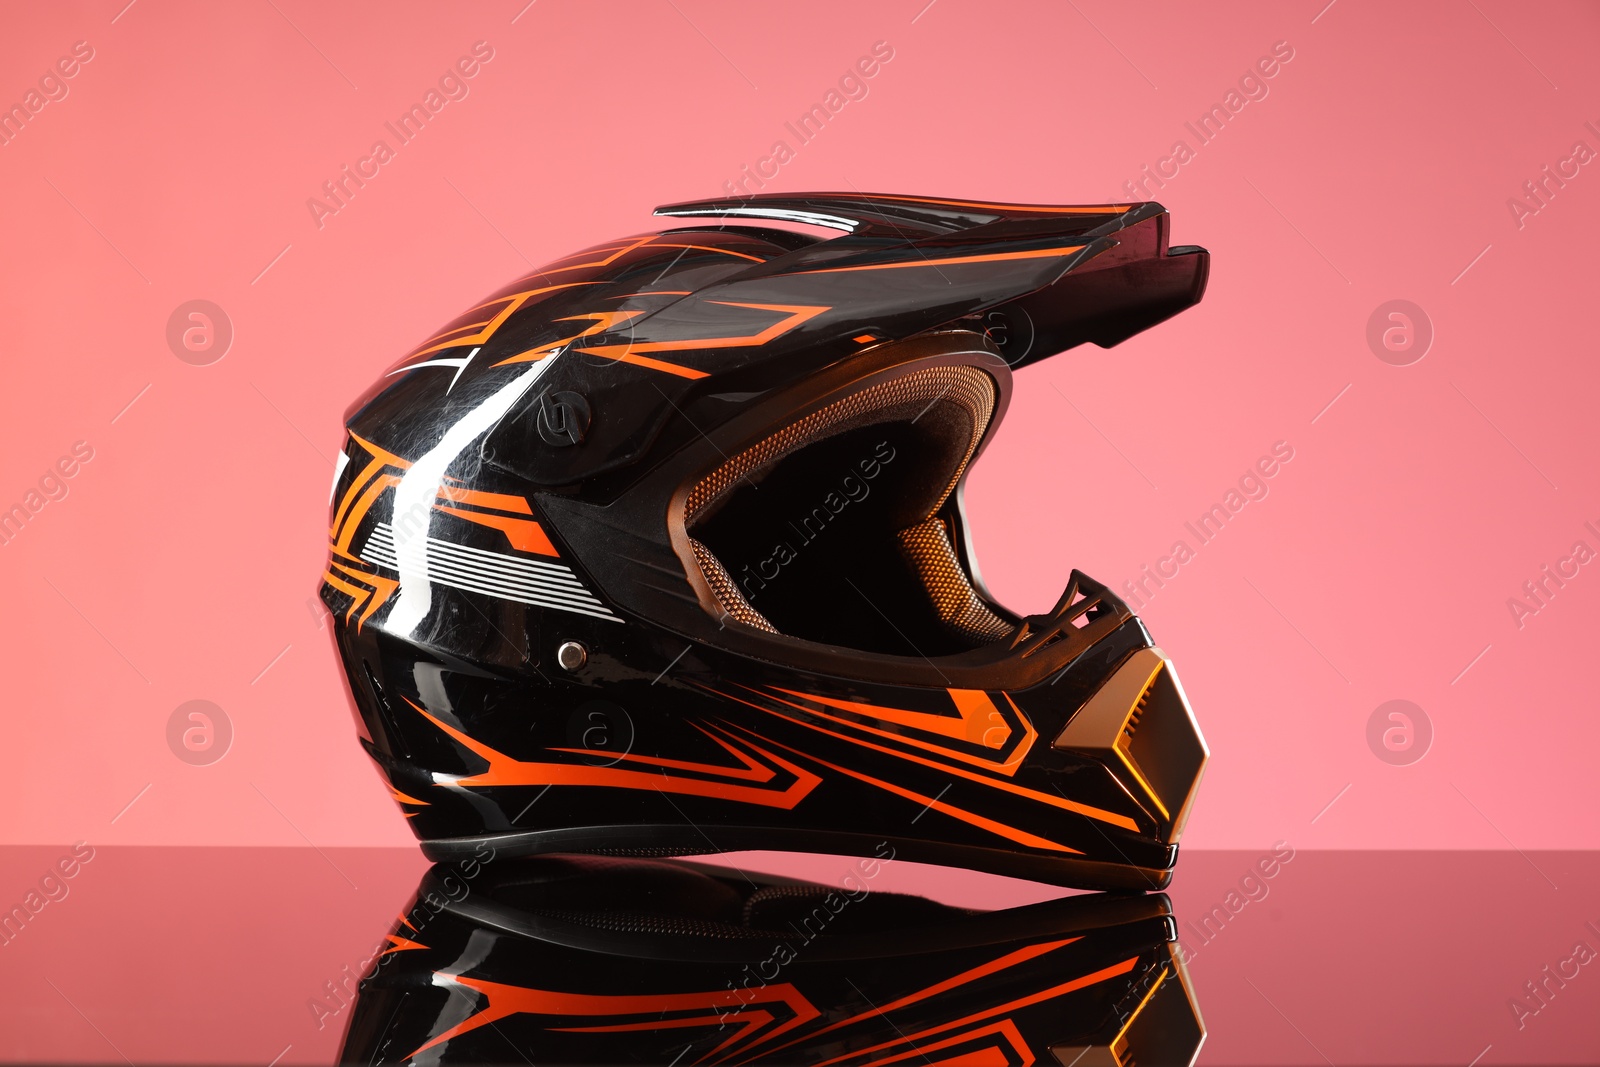 Photo of Modern motorcycle helmet with visor on mirror surface against pink background